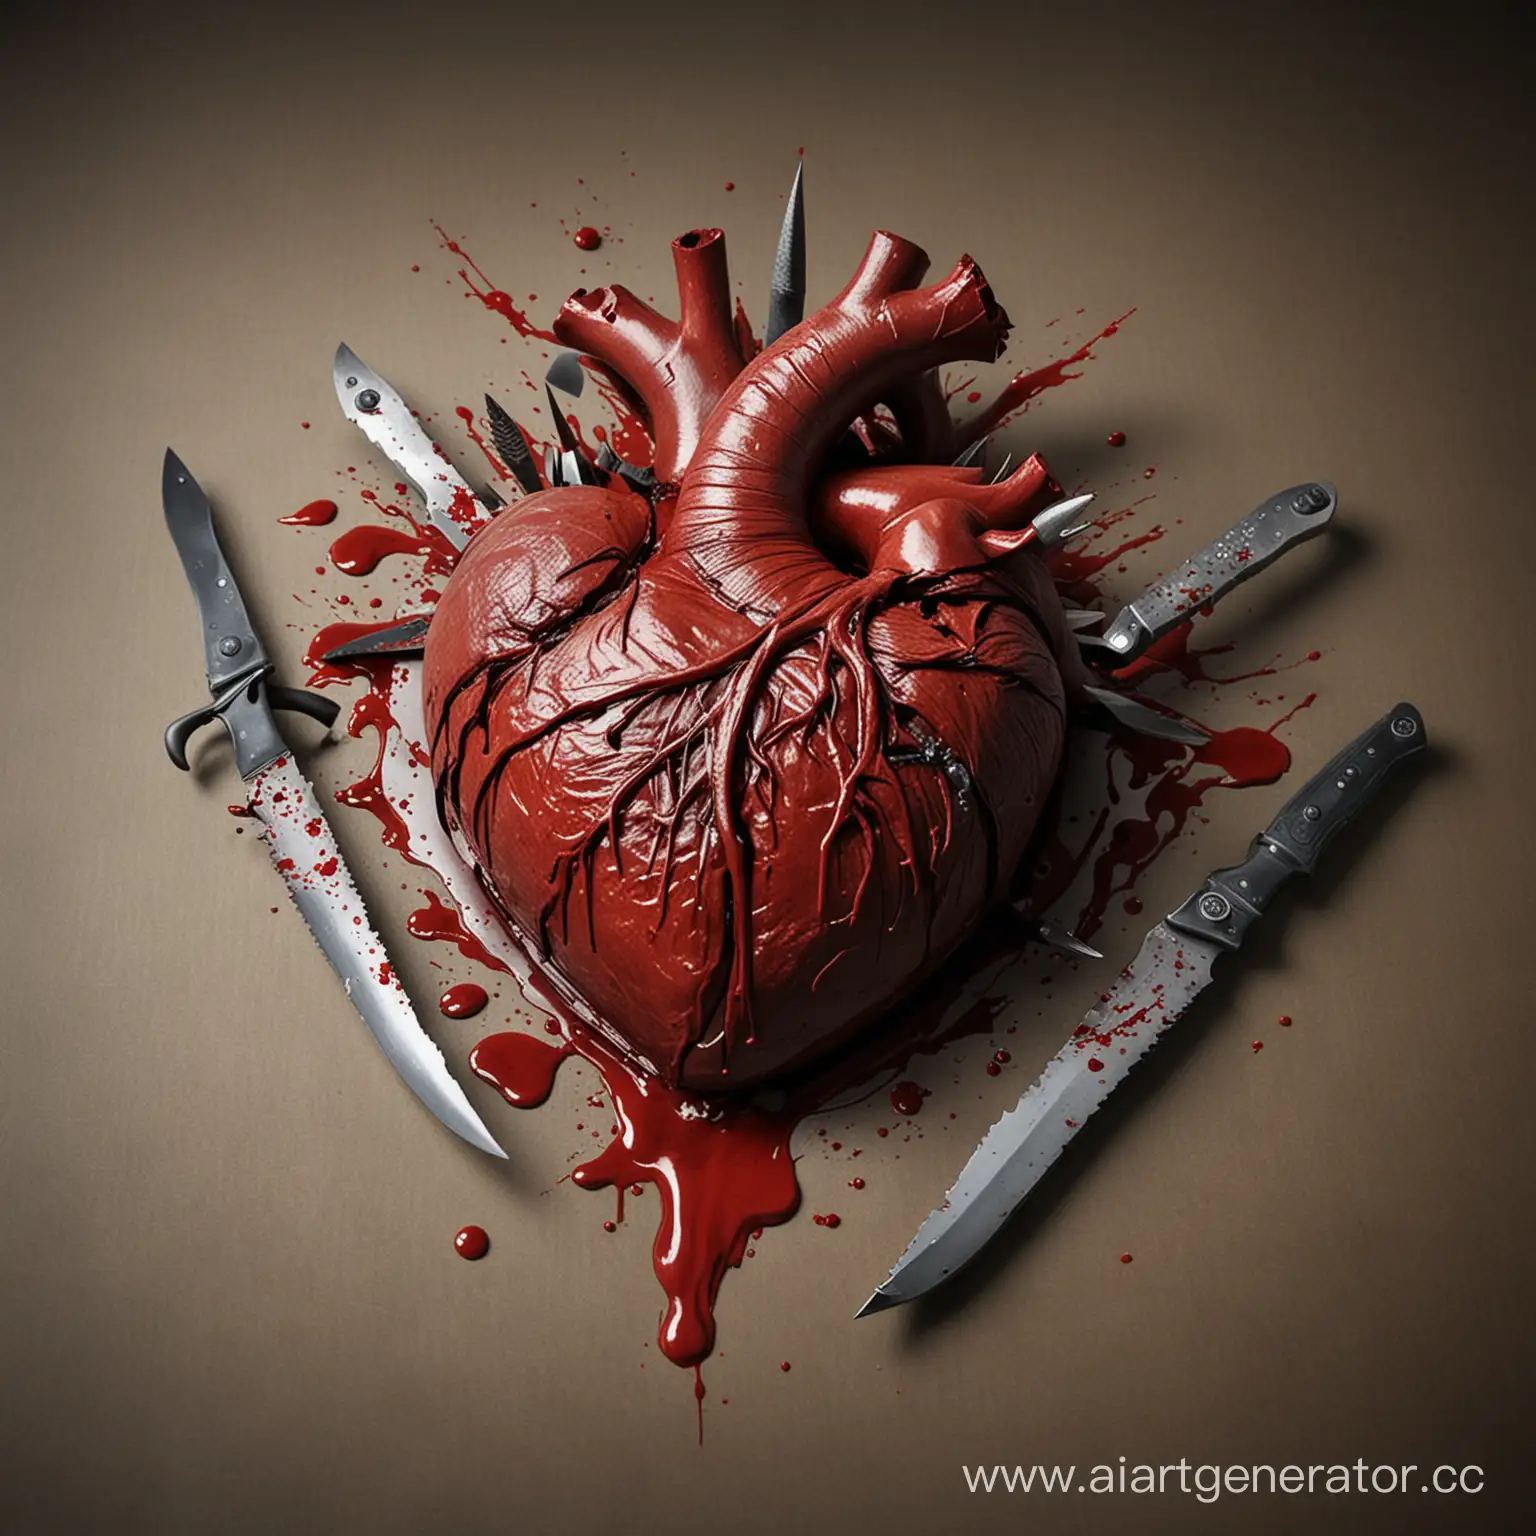 Pierced-Heart-with-Knives-in-a-BloodStained-Environment